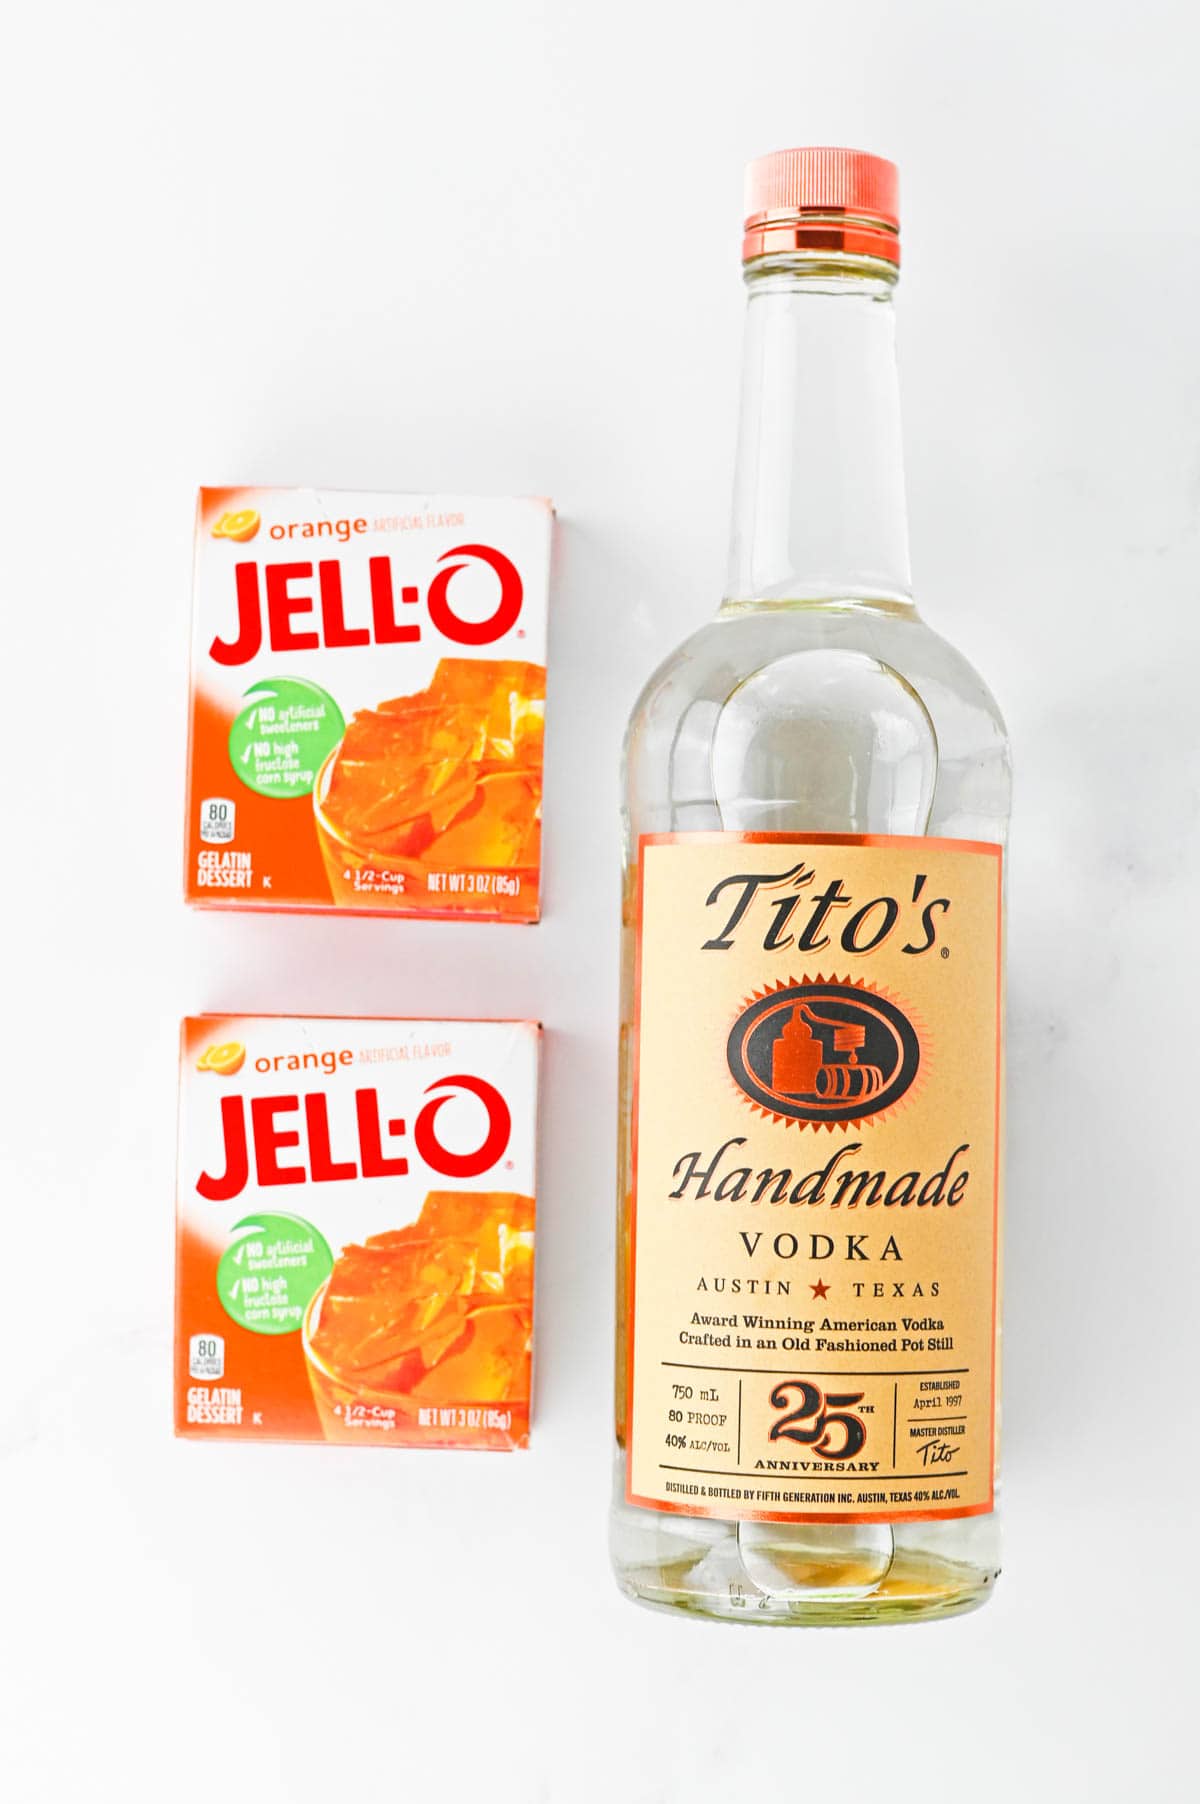 Two packets of orange jello next to a bottle of vodka.